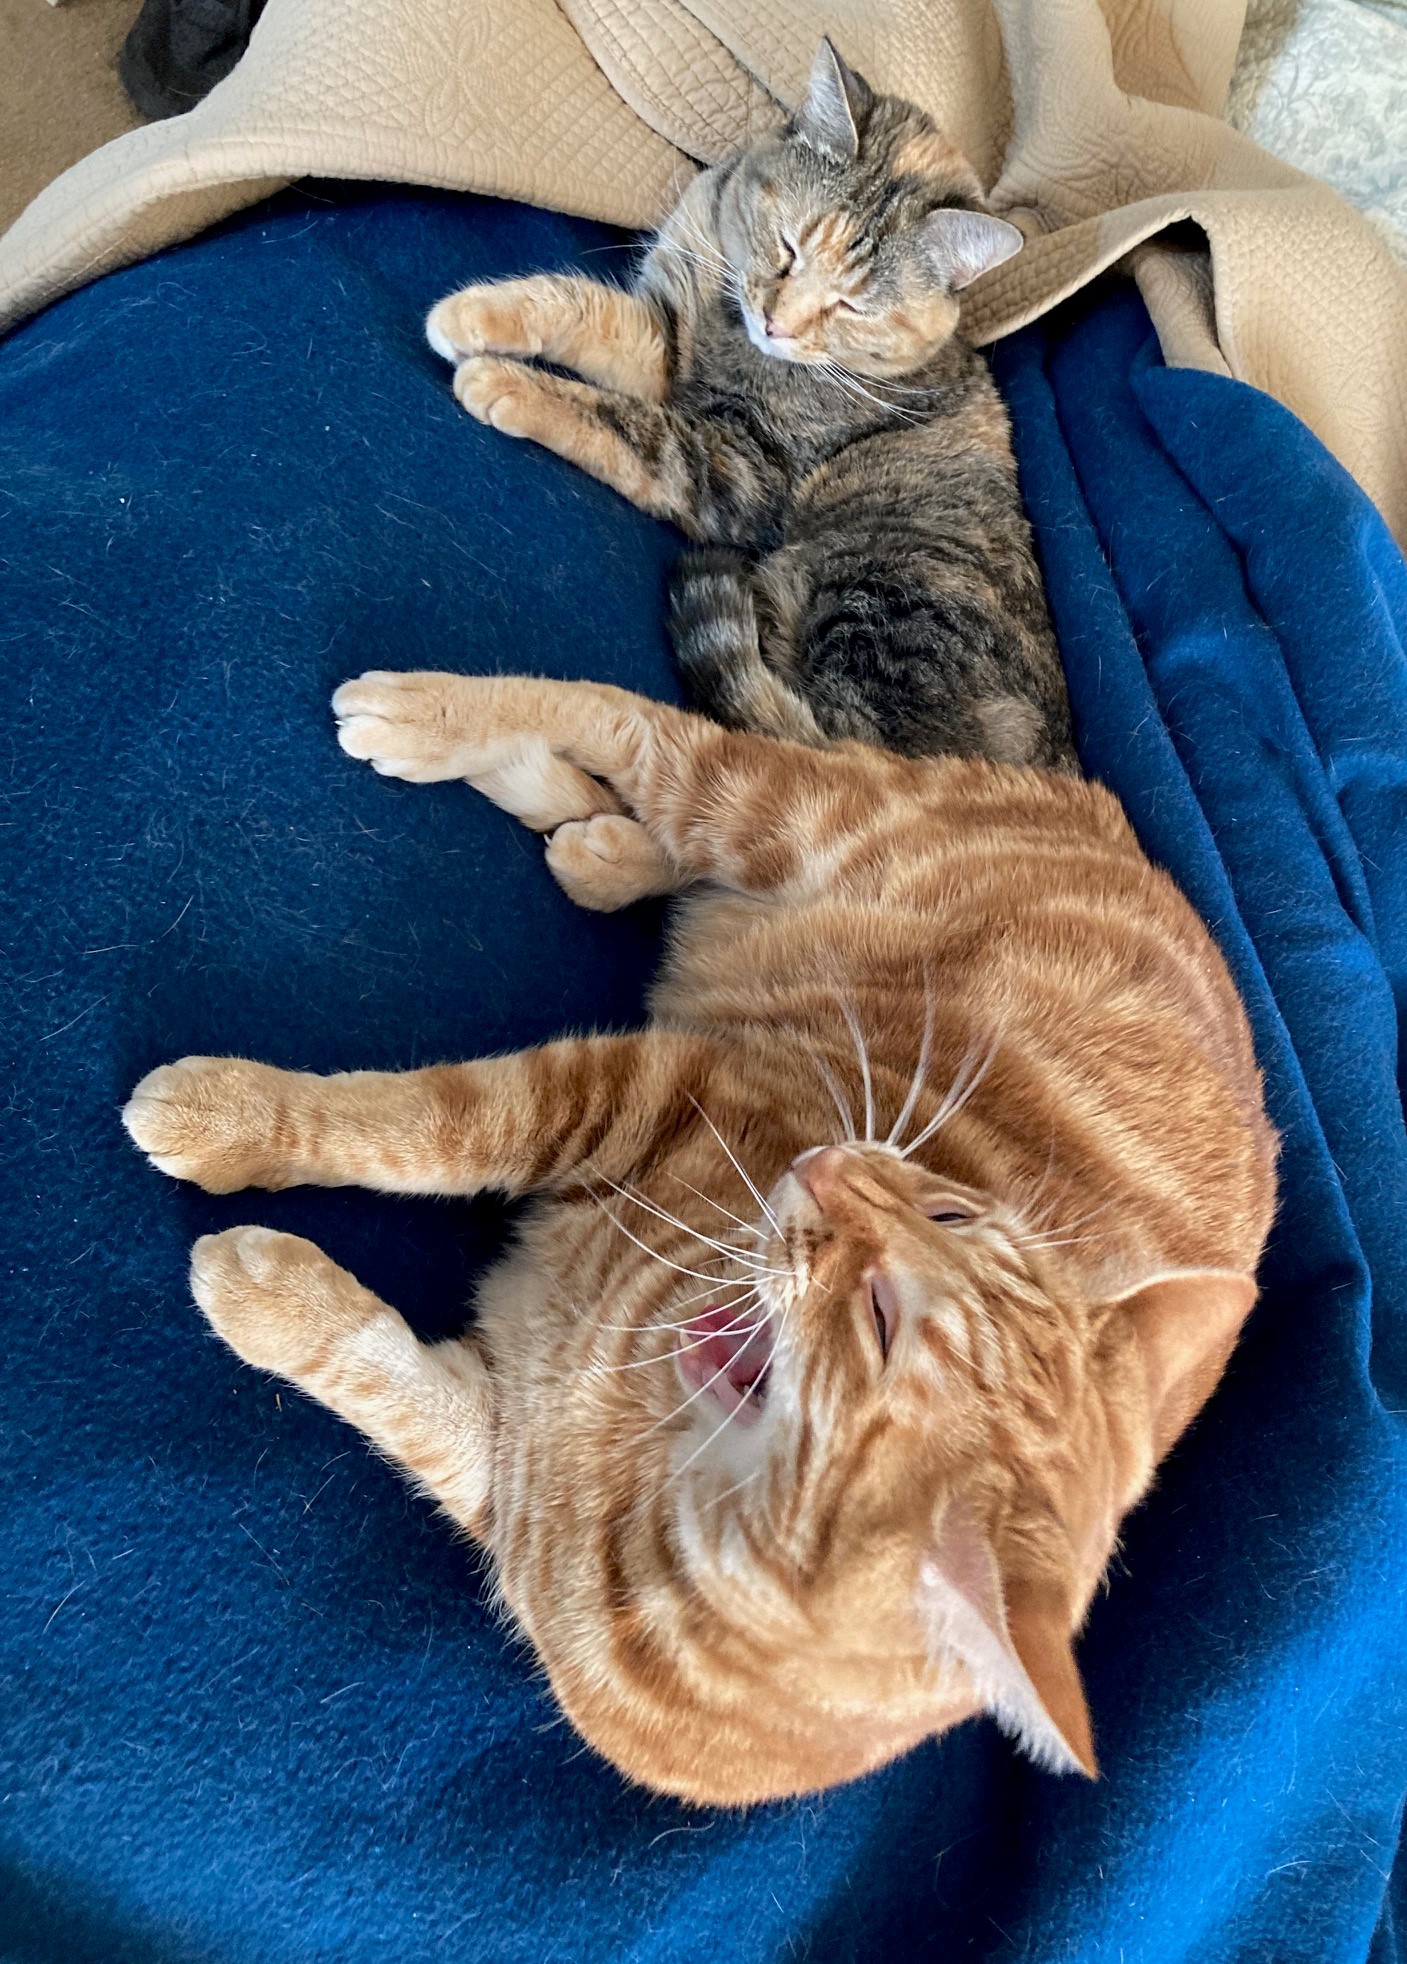 Photo of two cats, lounging happily on a comfy blue blanket. The golden cat in the foreground is enjoying a nice wide yawn, while the gray cat lays with its eyes closed happily.